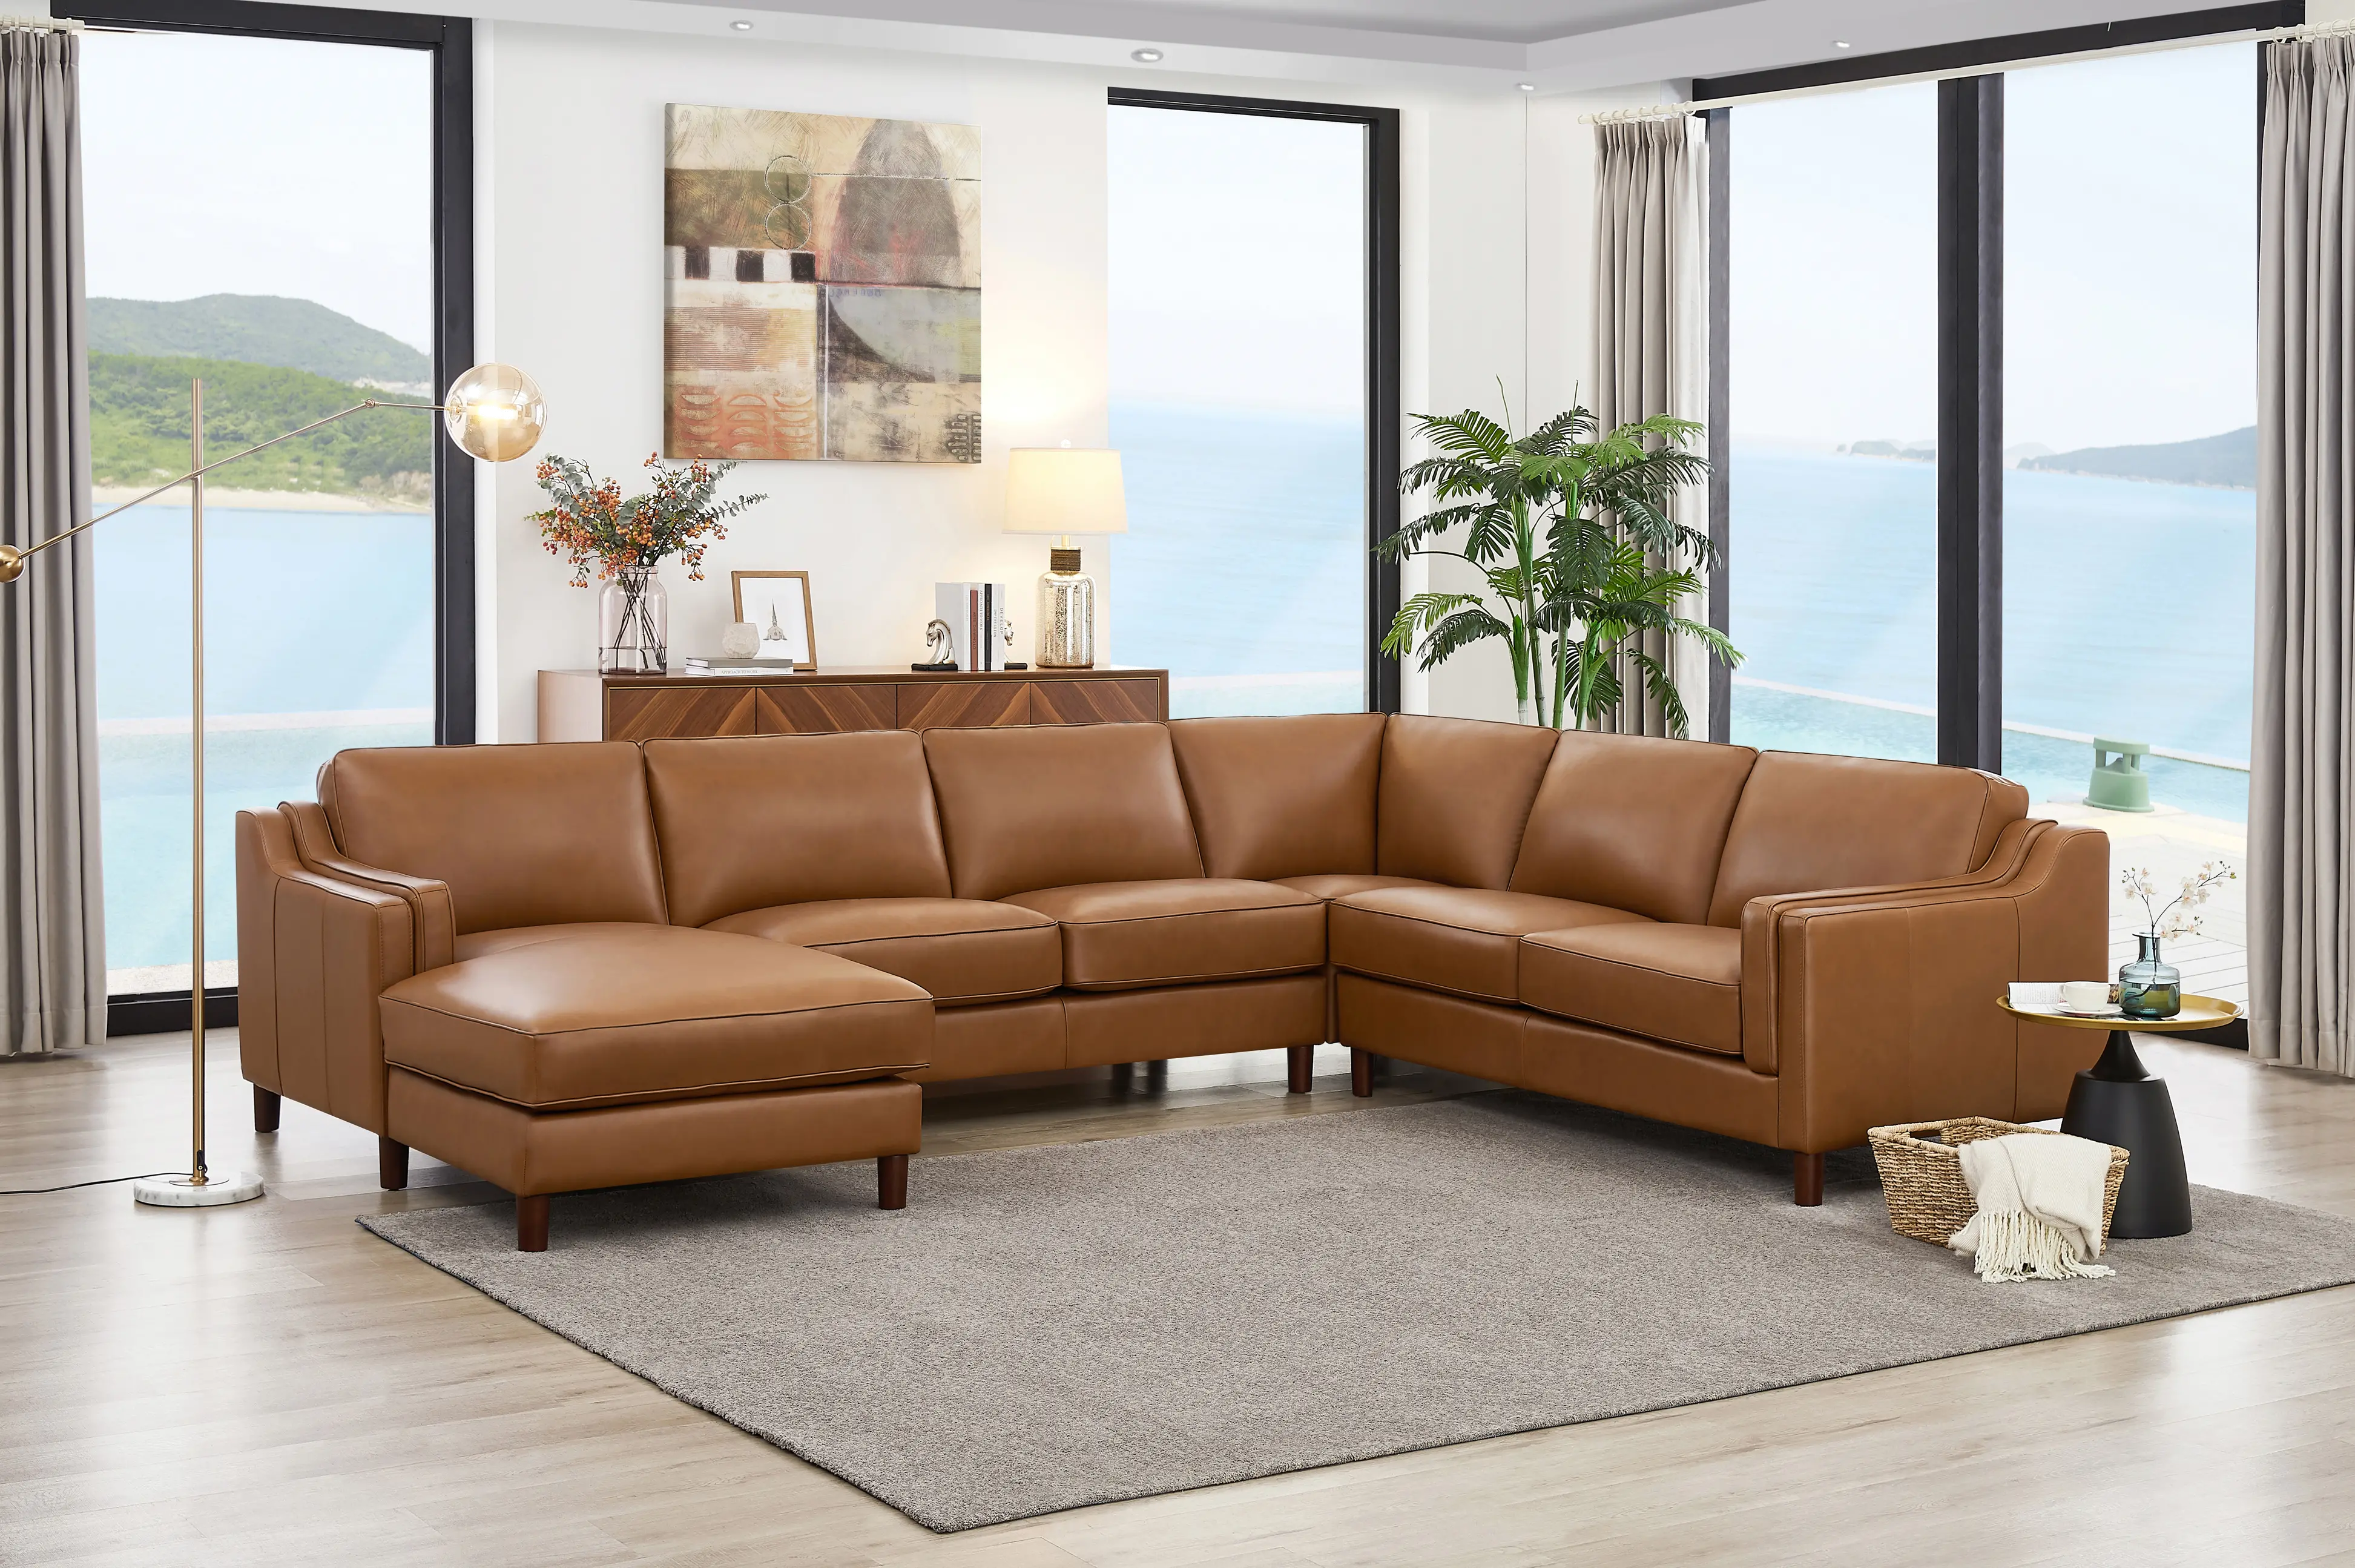 Ballari Cognac Brown Leather 4 Piece Sectional with Left-Facing...